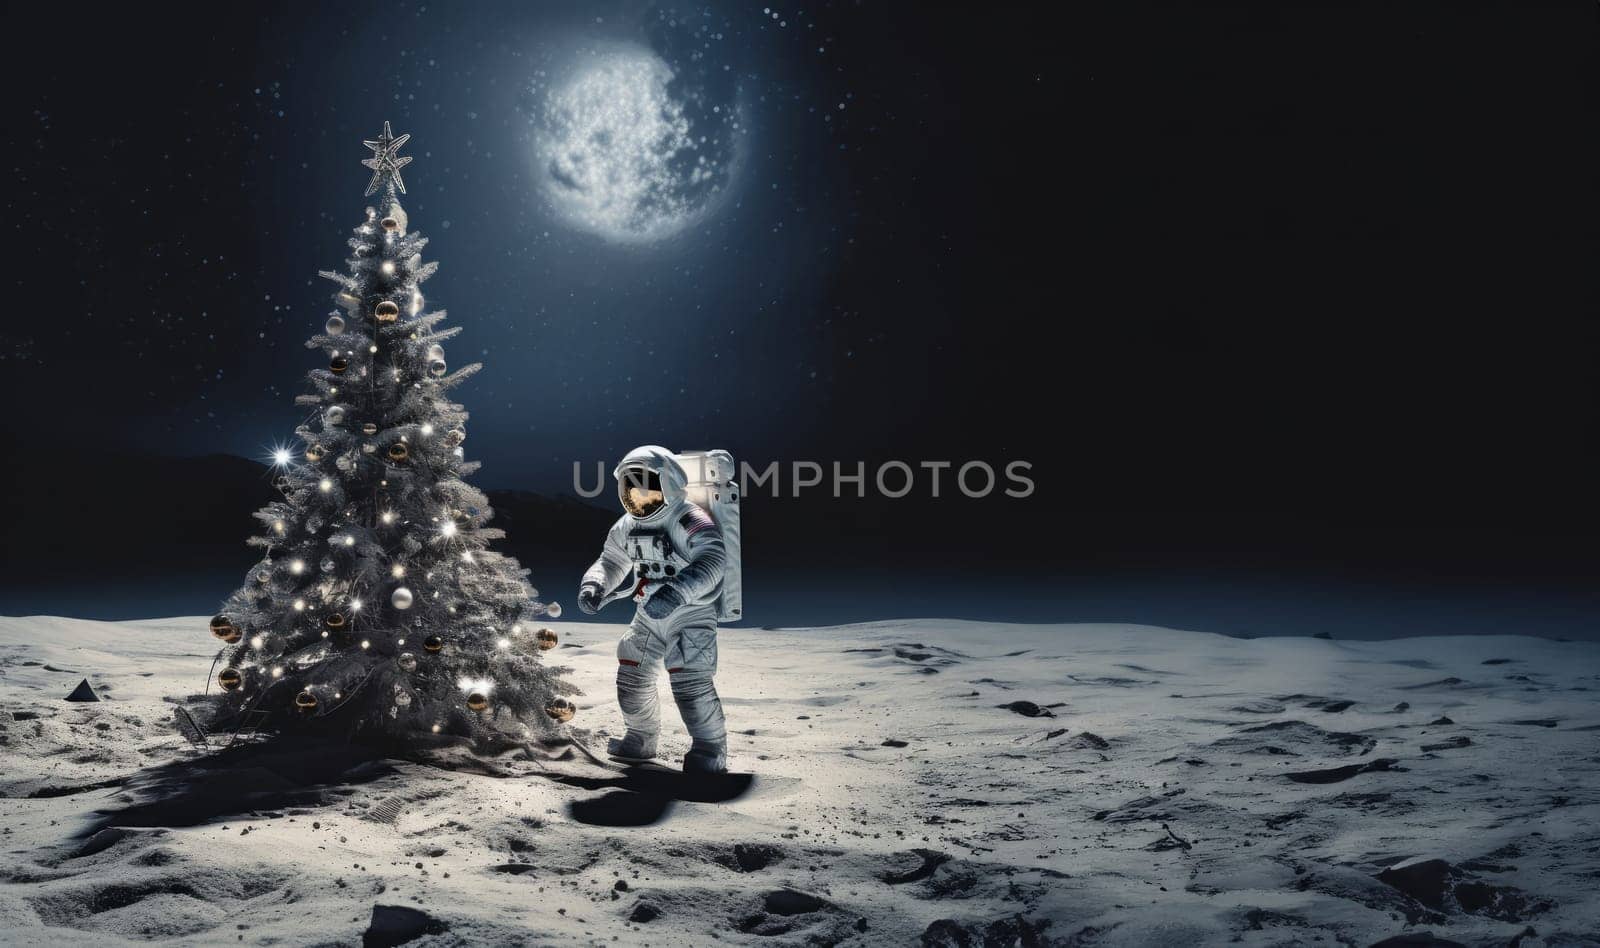 An astronaut on Mars celebrates the holiday season by decorating a Christmas tree, bringing a festive spirit to the distant red planet.Generated image.